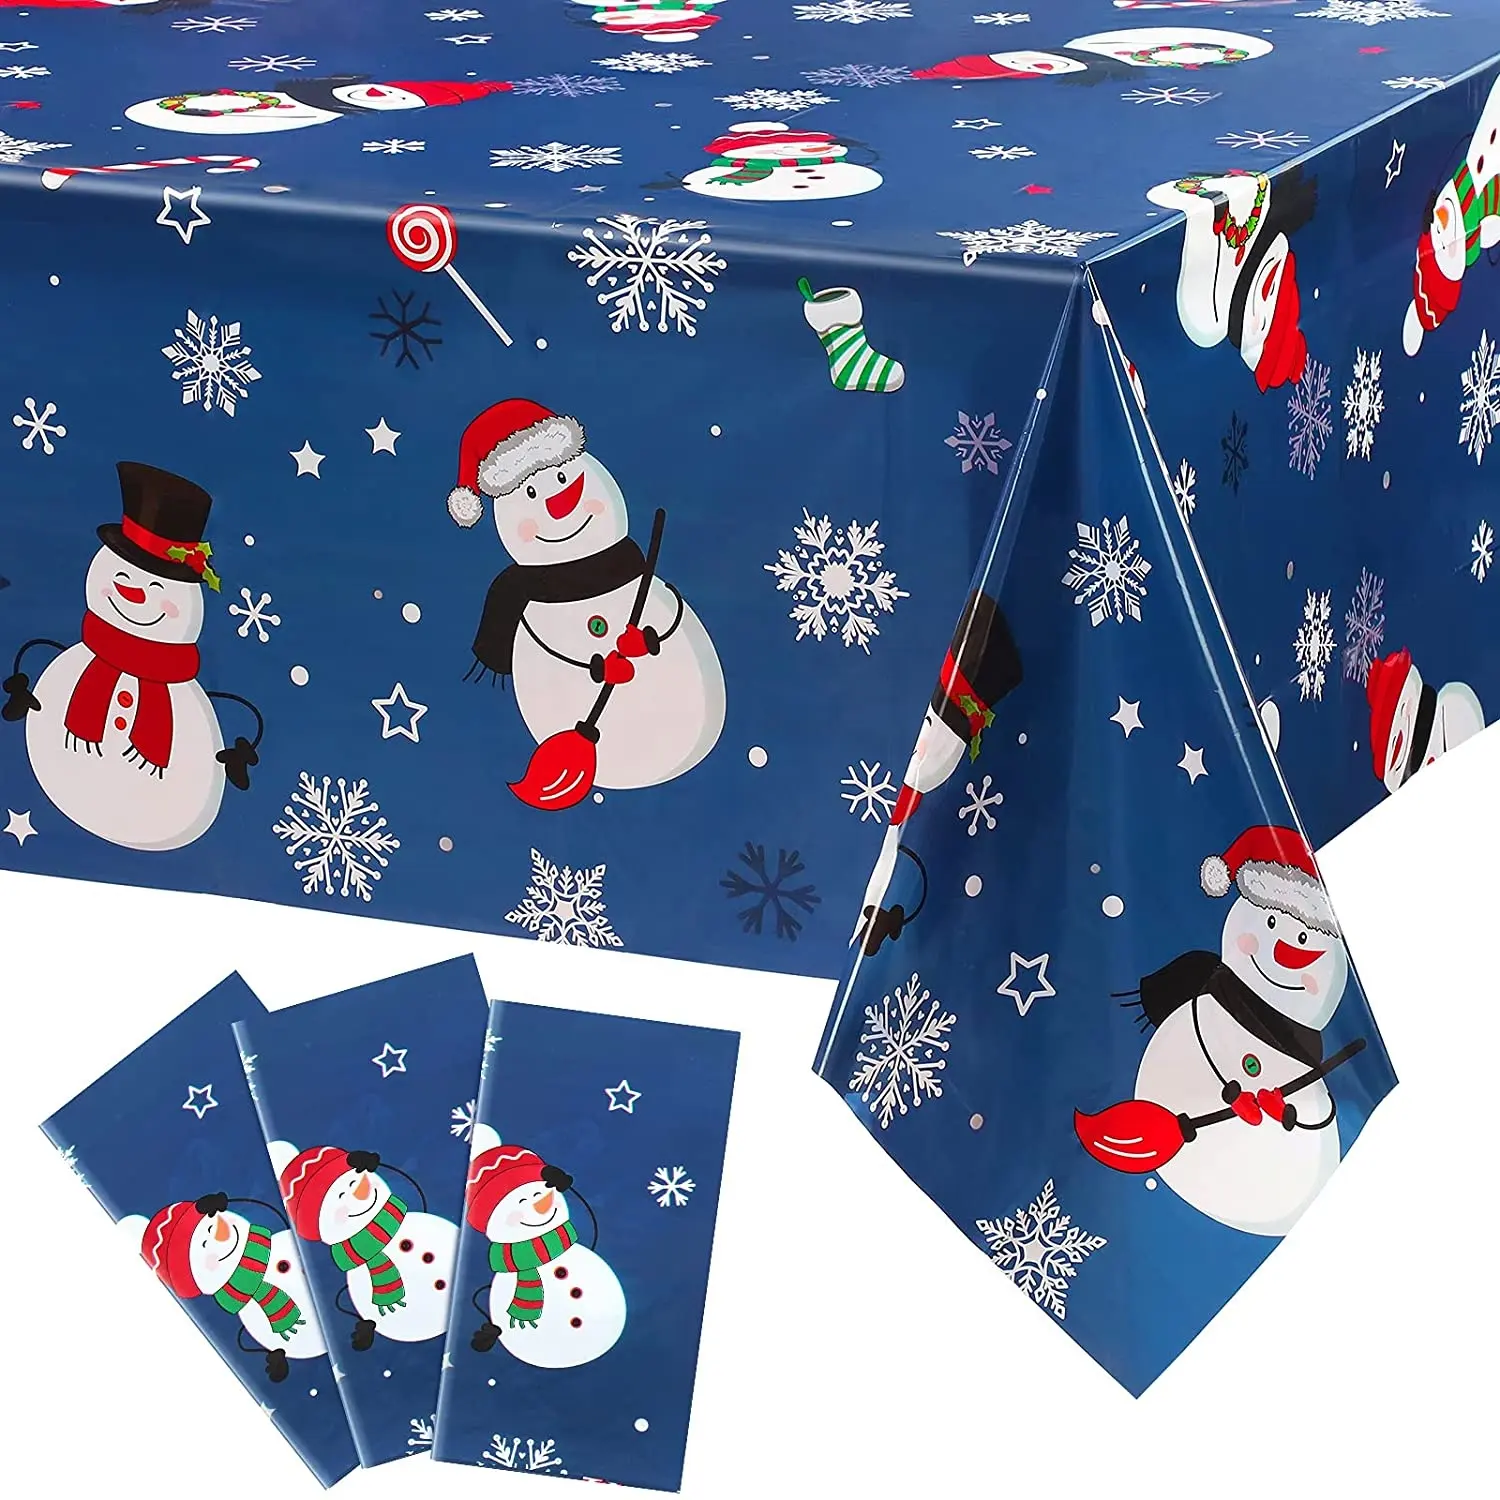 Snowman Christmas Party Tablecloth Decorations Snowflakes Plastic Table Cover Winter Christmas Tablecloth for Xmas Holiday